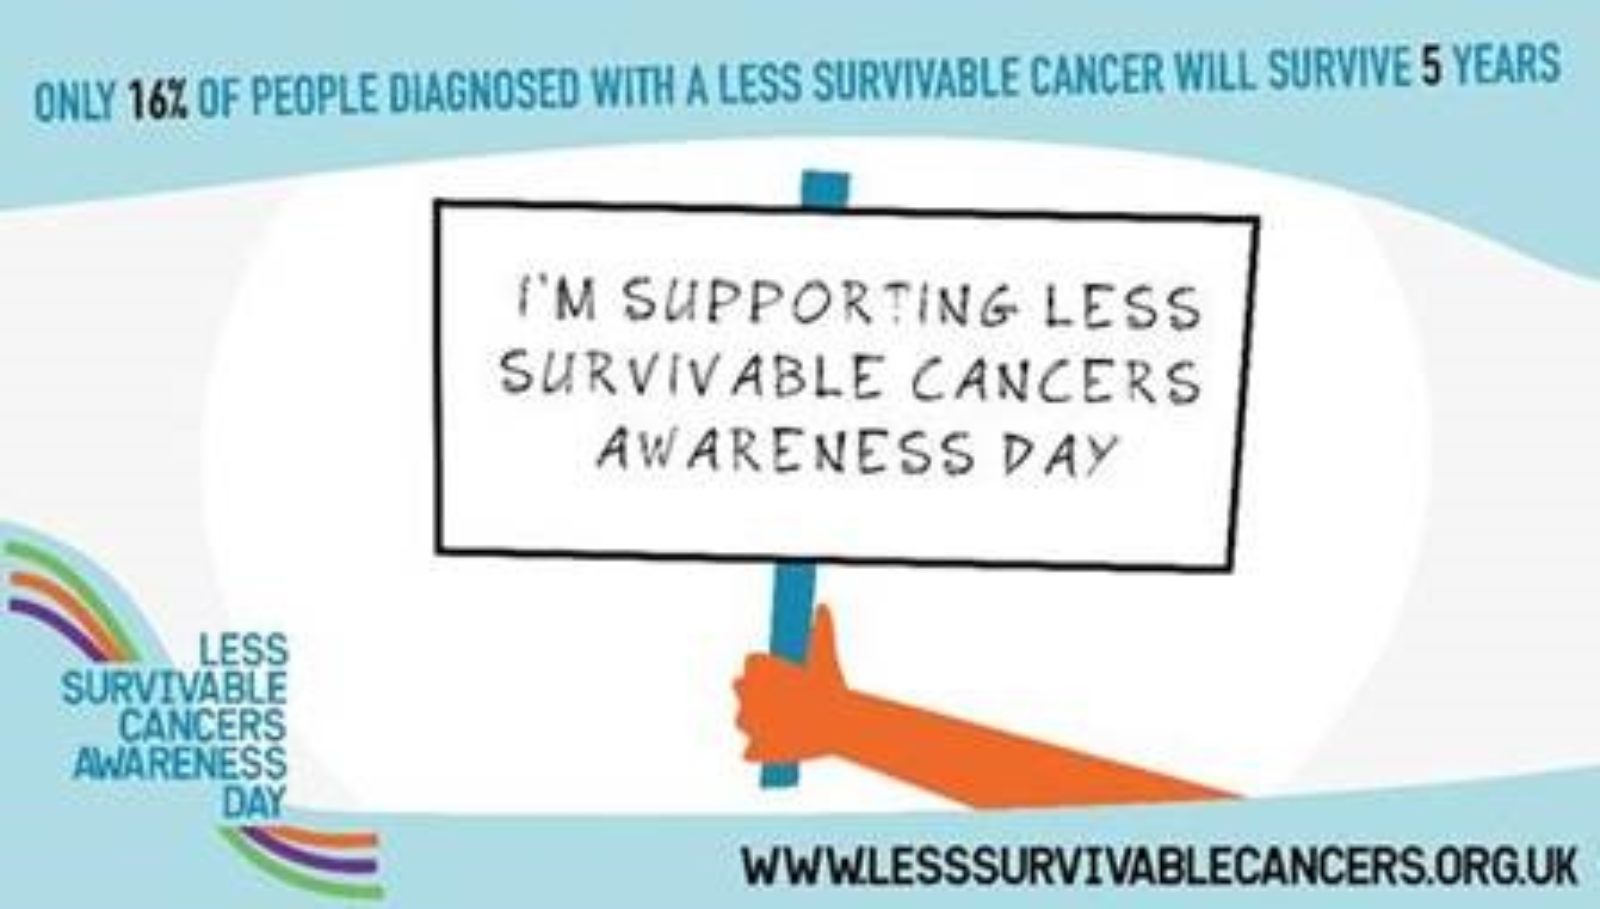 Less Survivable Cancer Awareness Day